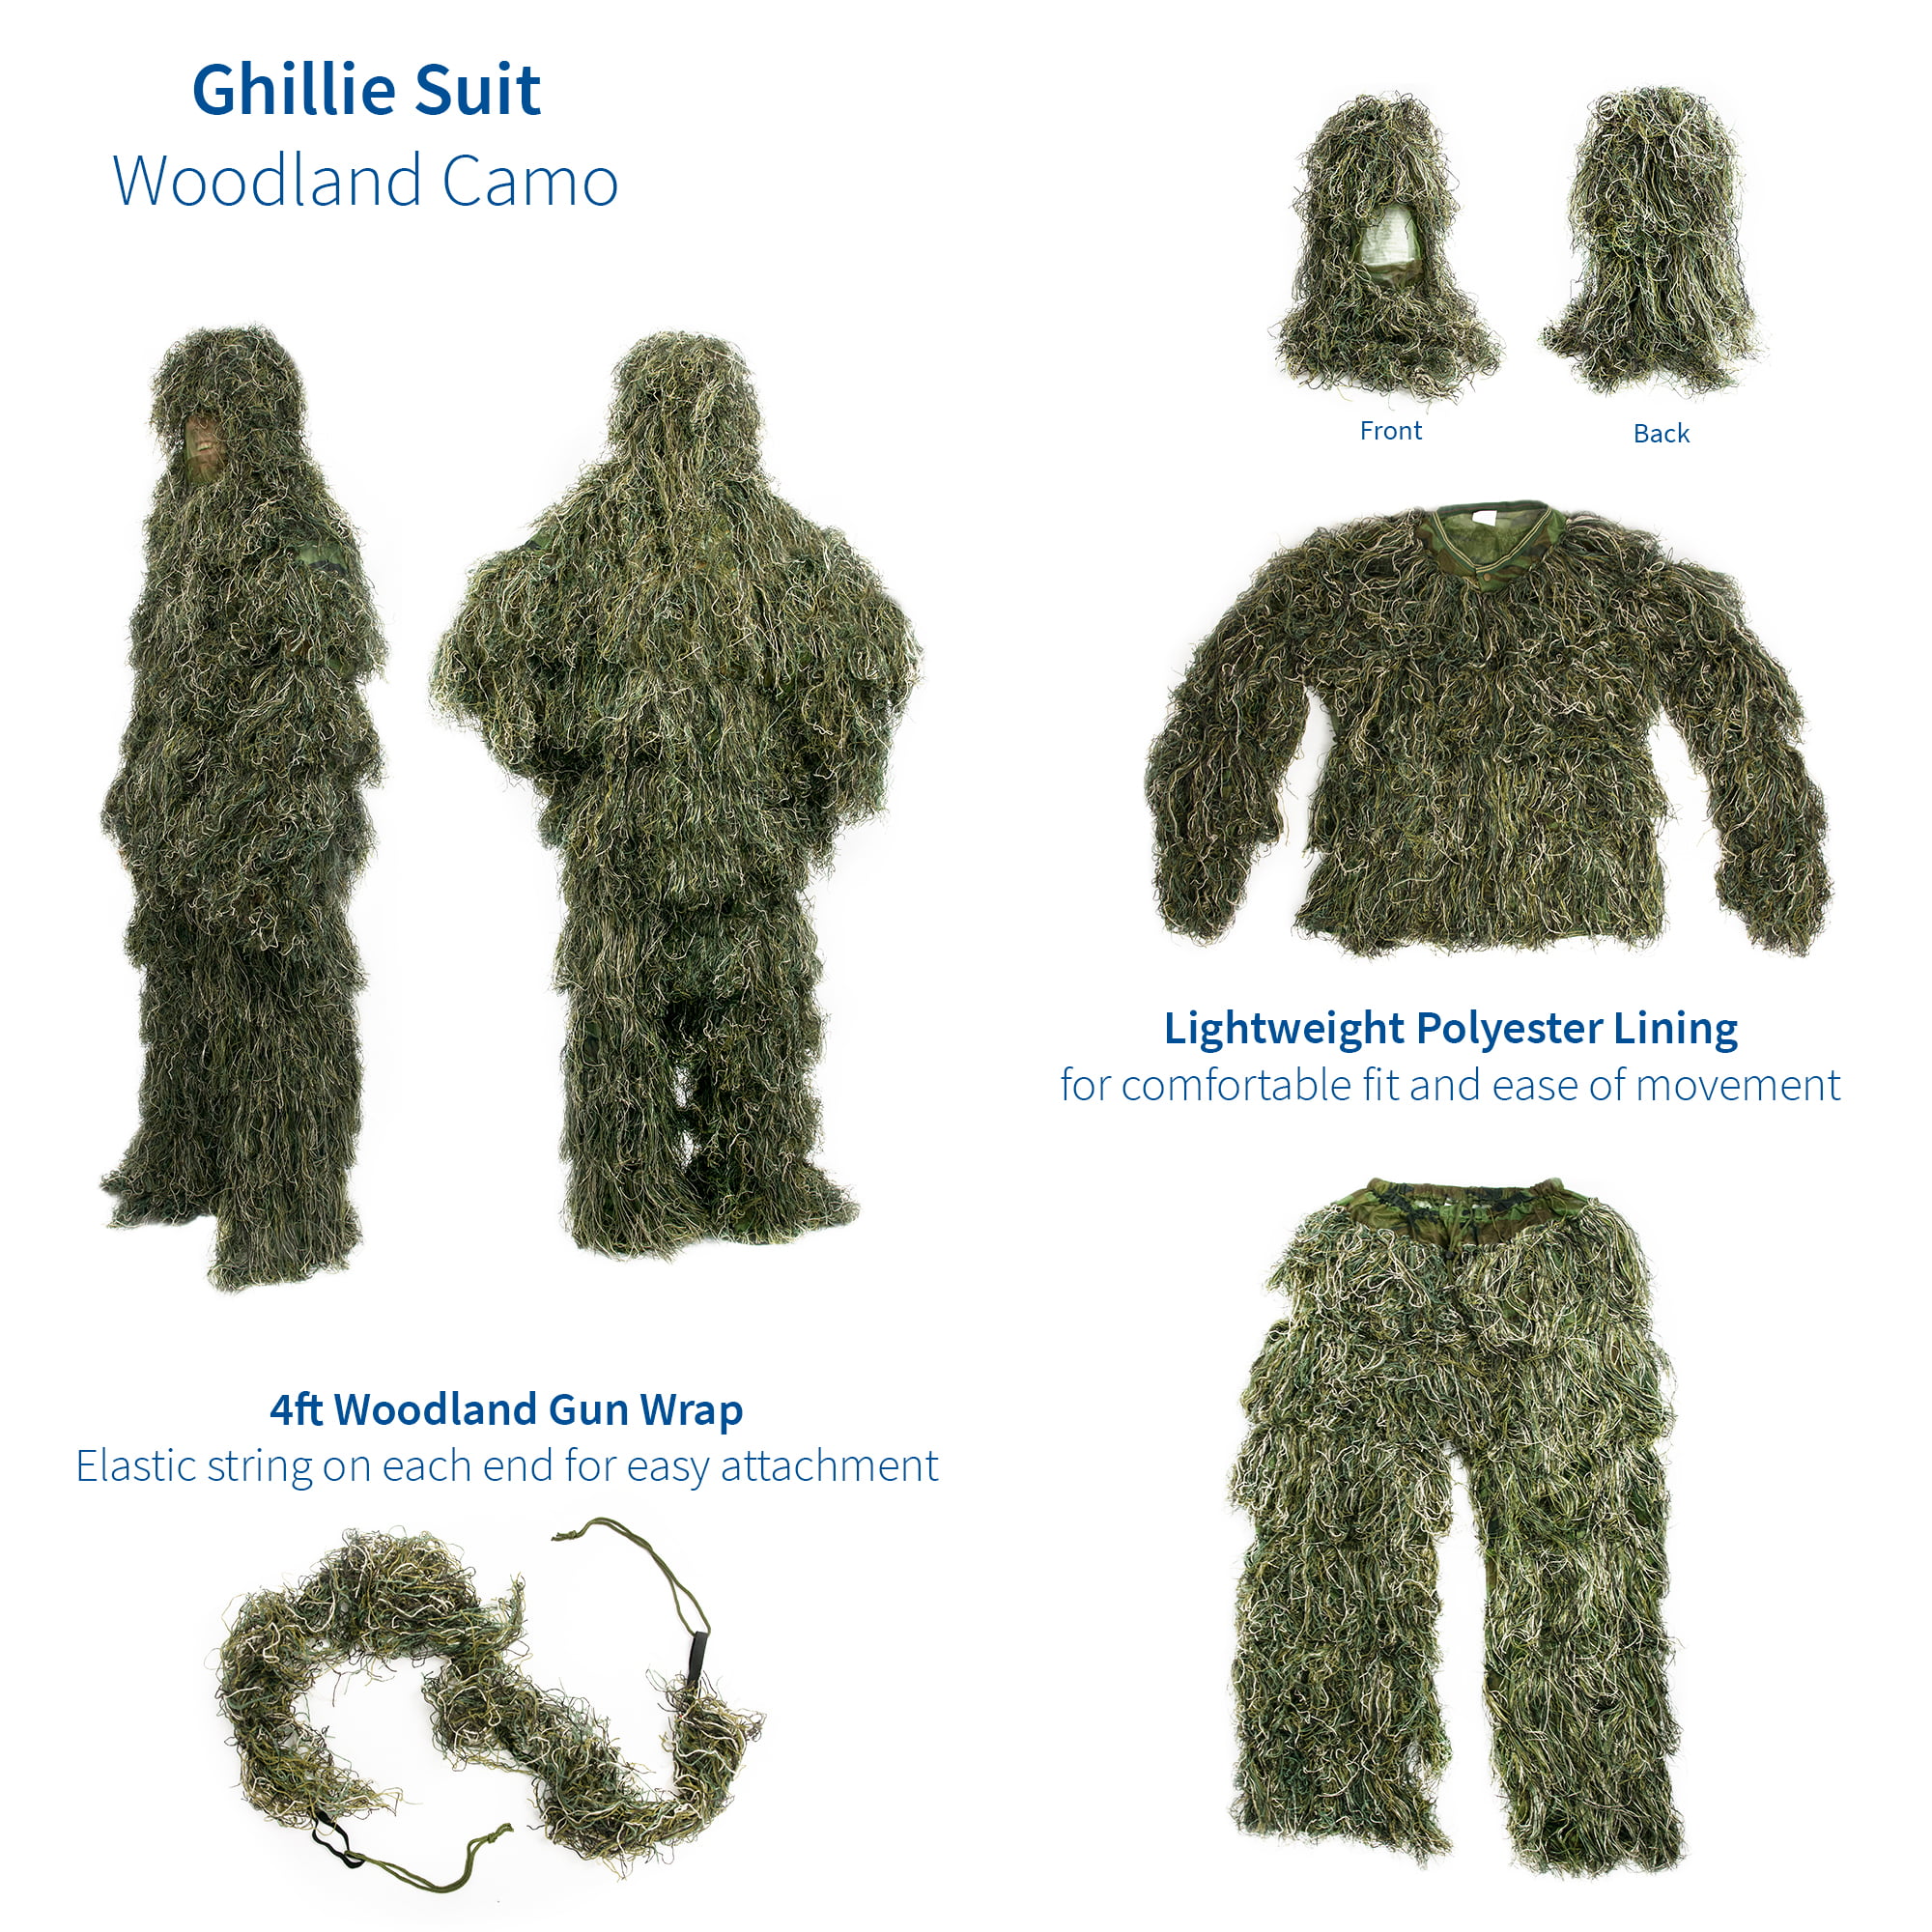 Details about   New Ghillie Suit Woodland Camouflage Forest Hunting Green Military Jungle Camo 